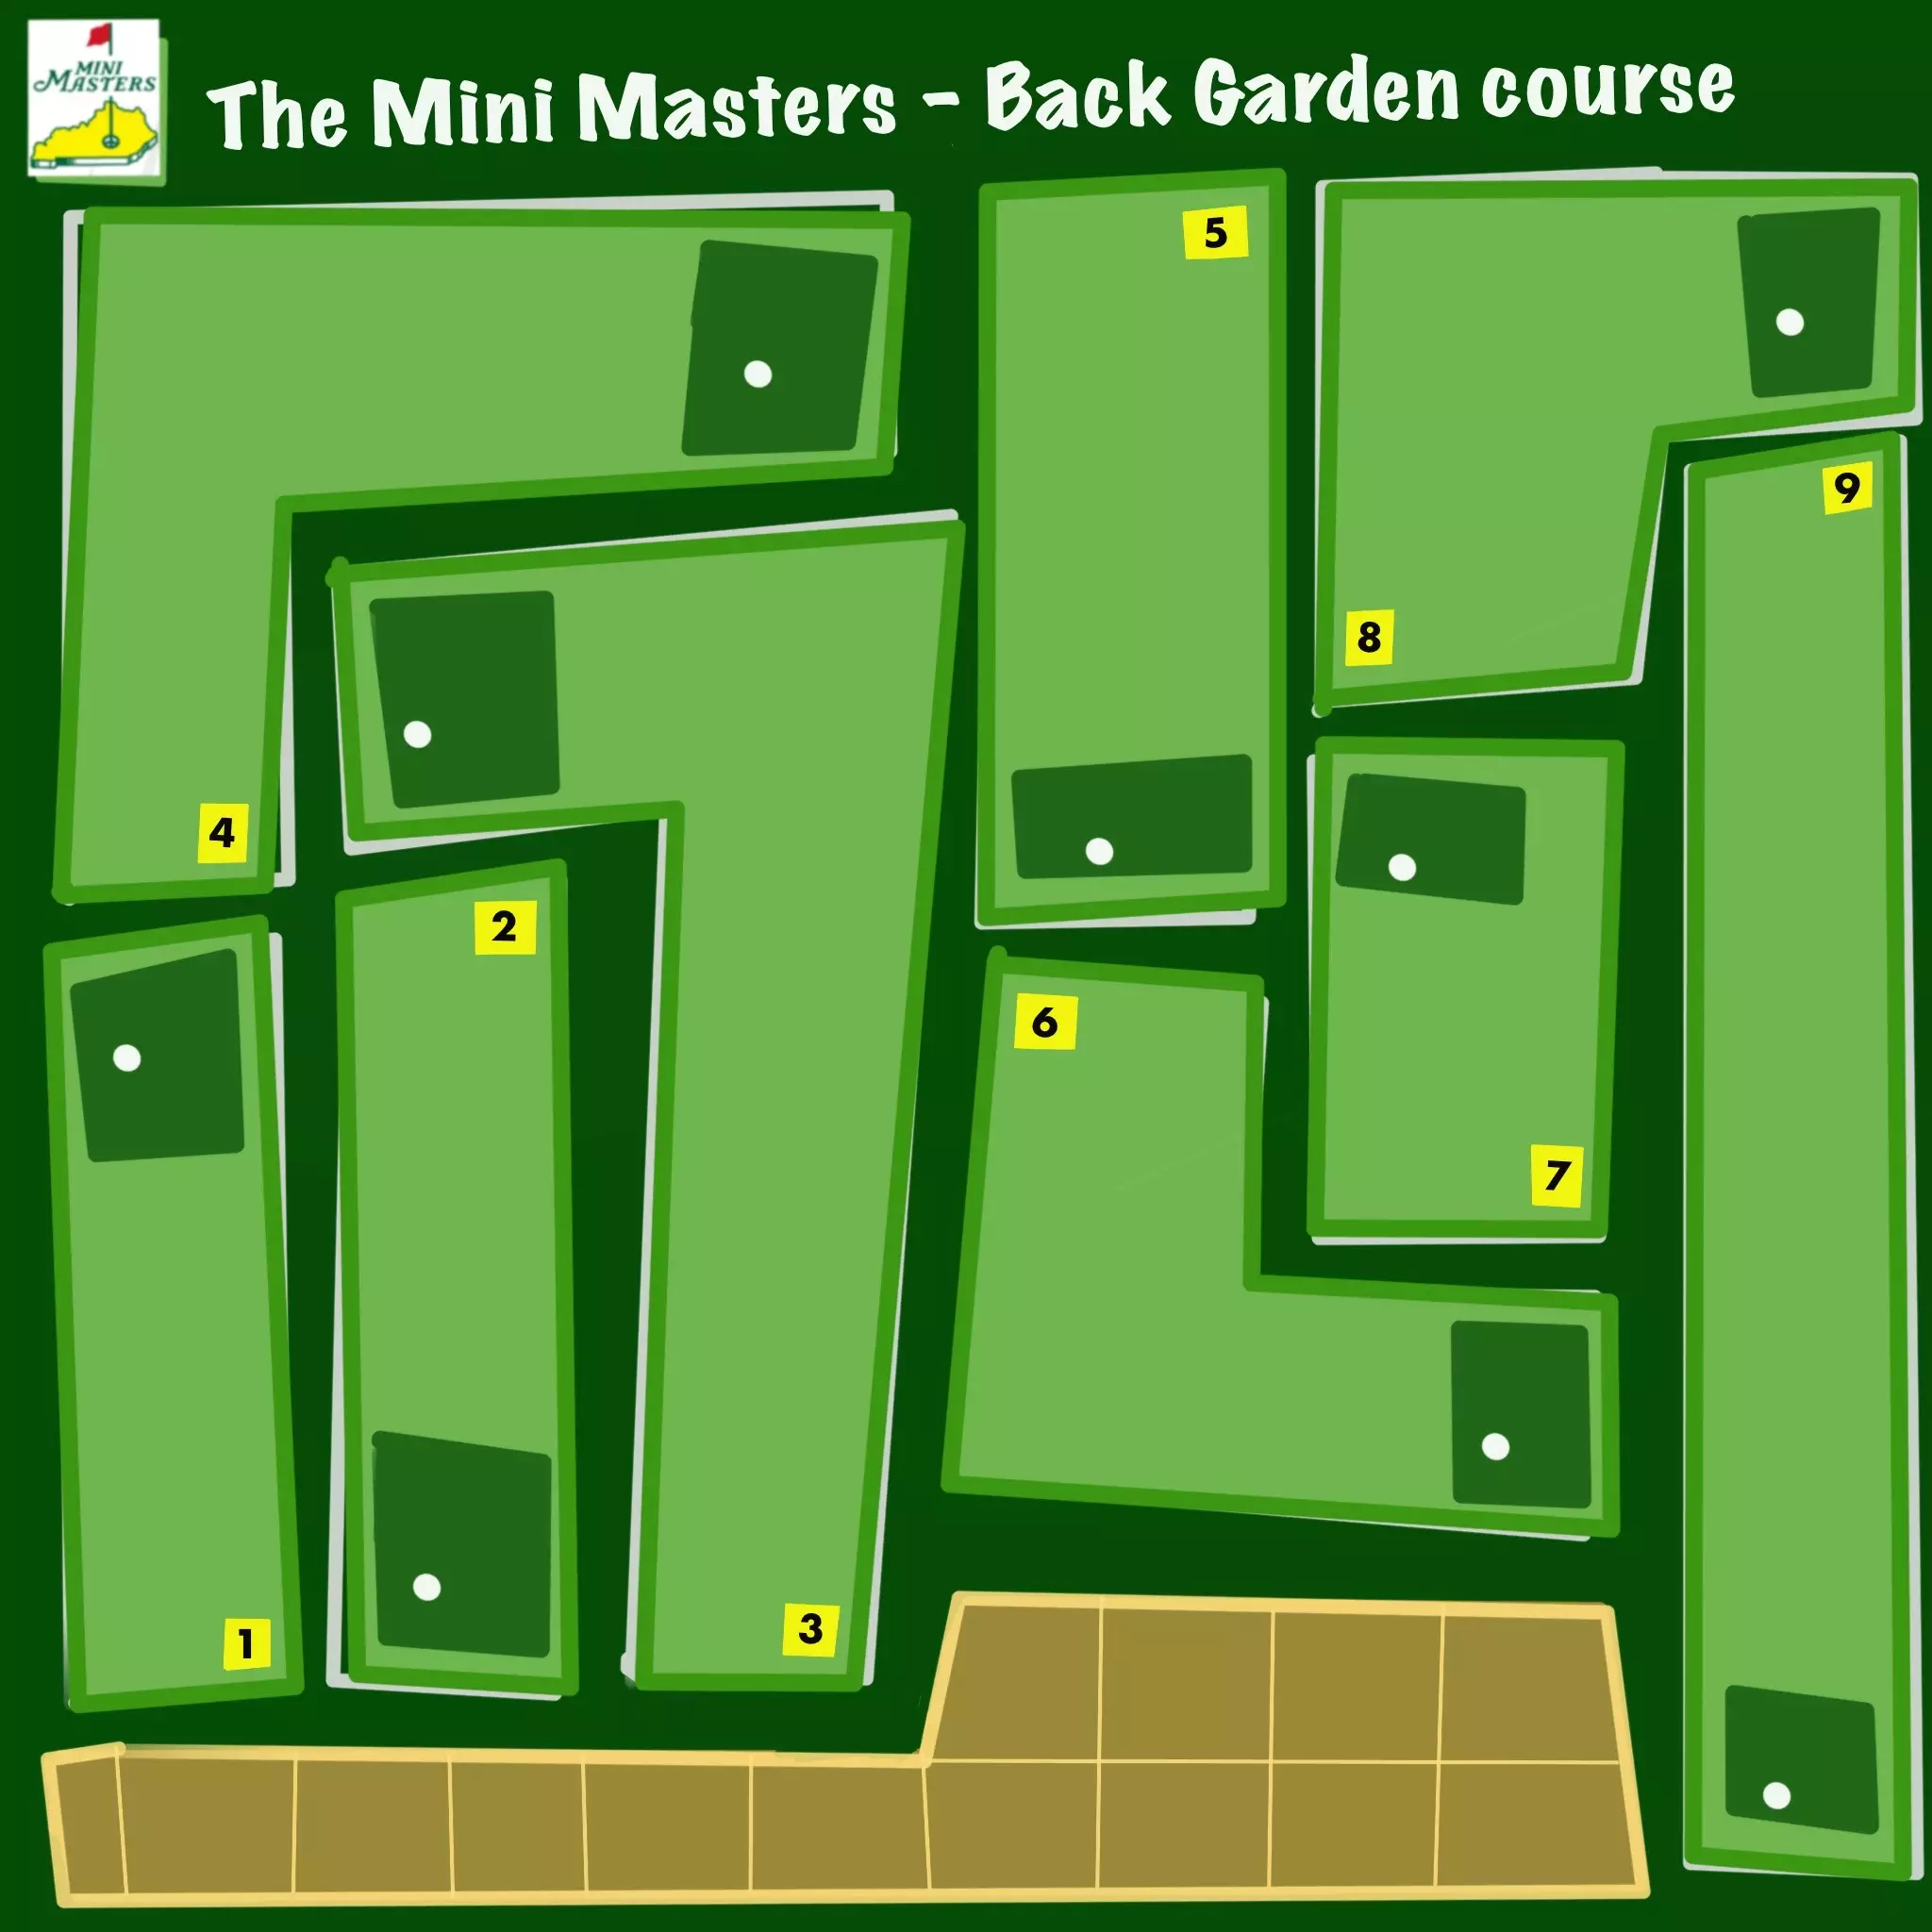 Sam planned the Mini Masters on his iPad before creating it in his garden.